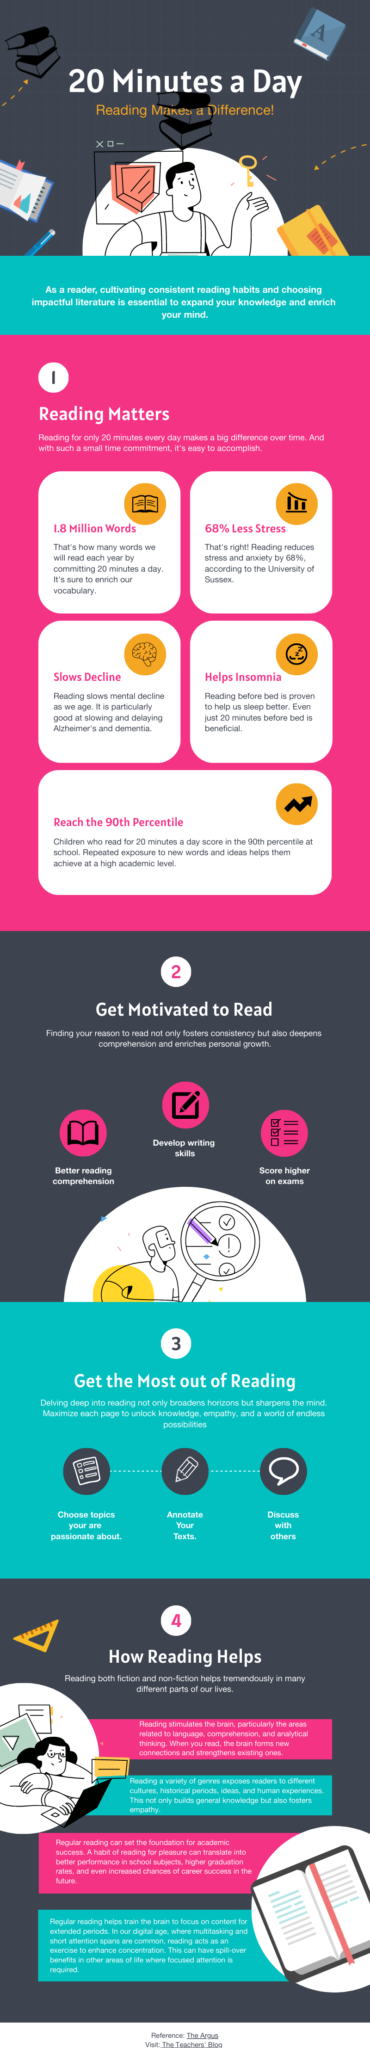 Reading for 20 Minutes a Day Infographic